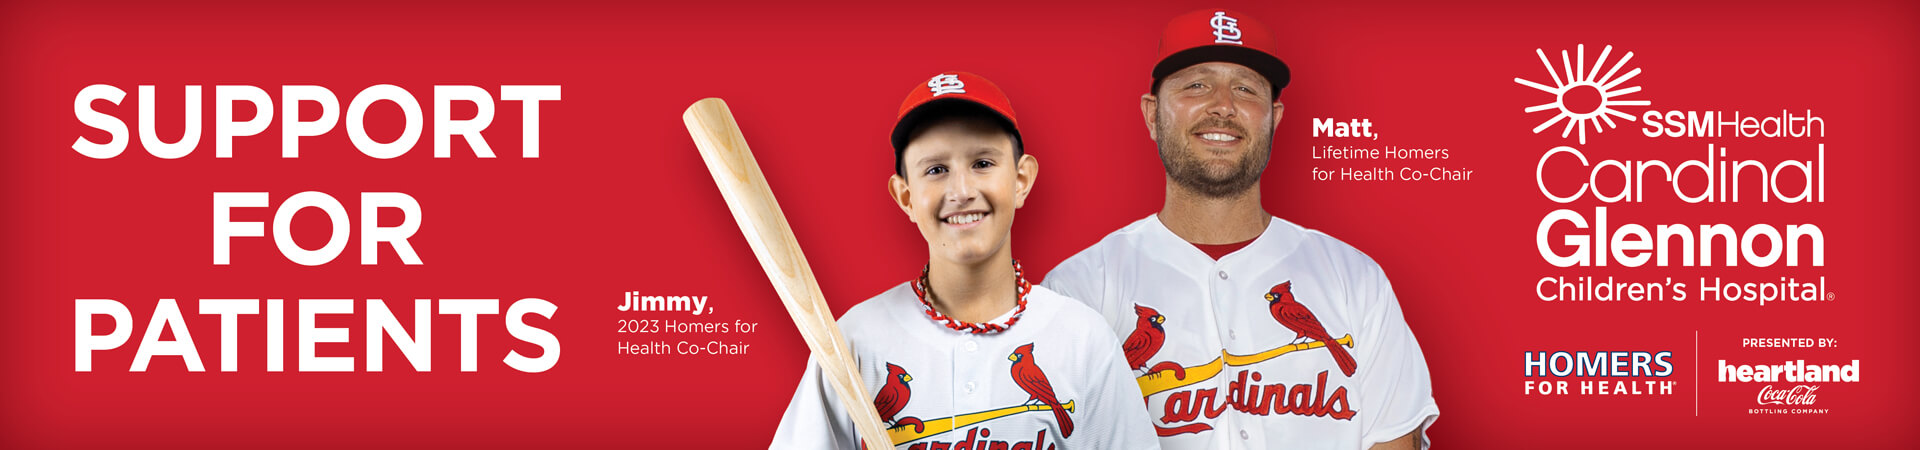 Support for Patients - Homers for Health Patient Co-chair, Jimmy and Lifetime Chairman Matt Holliday